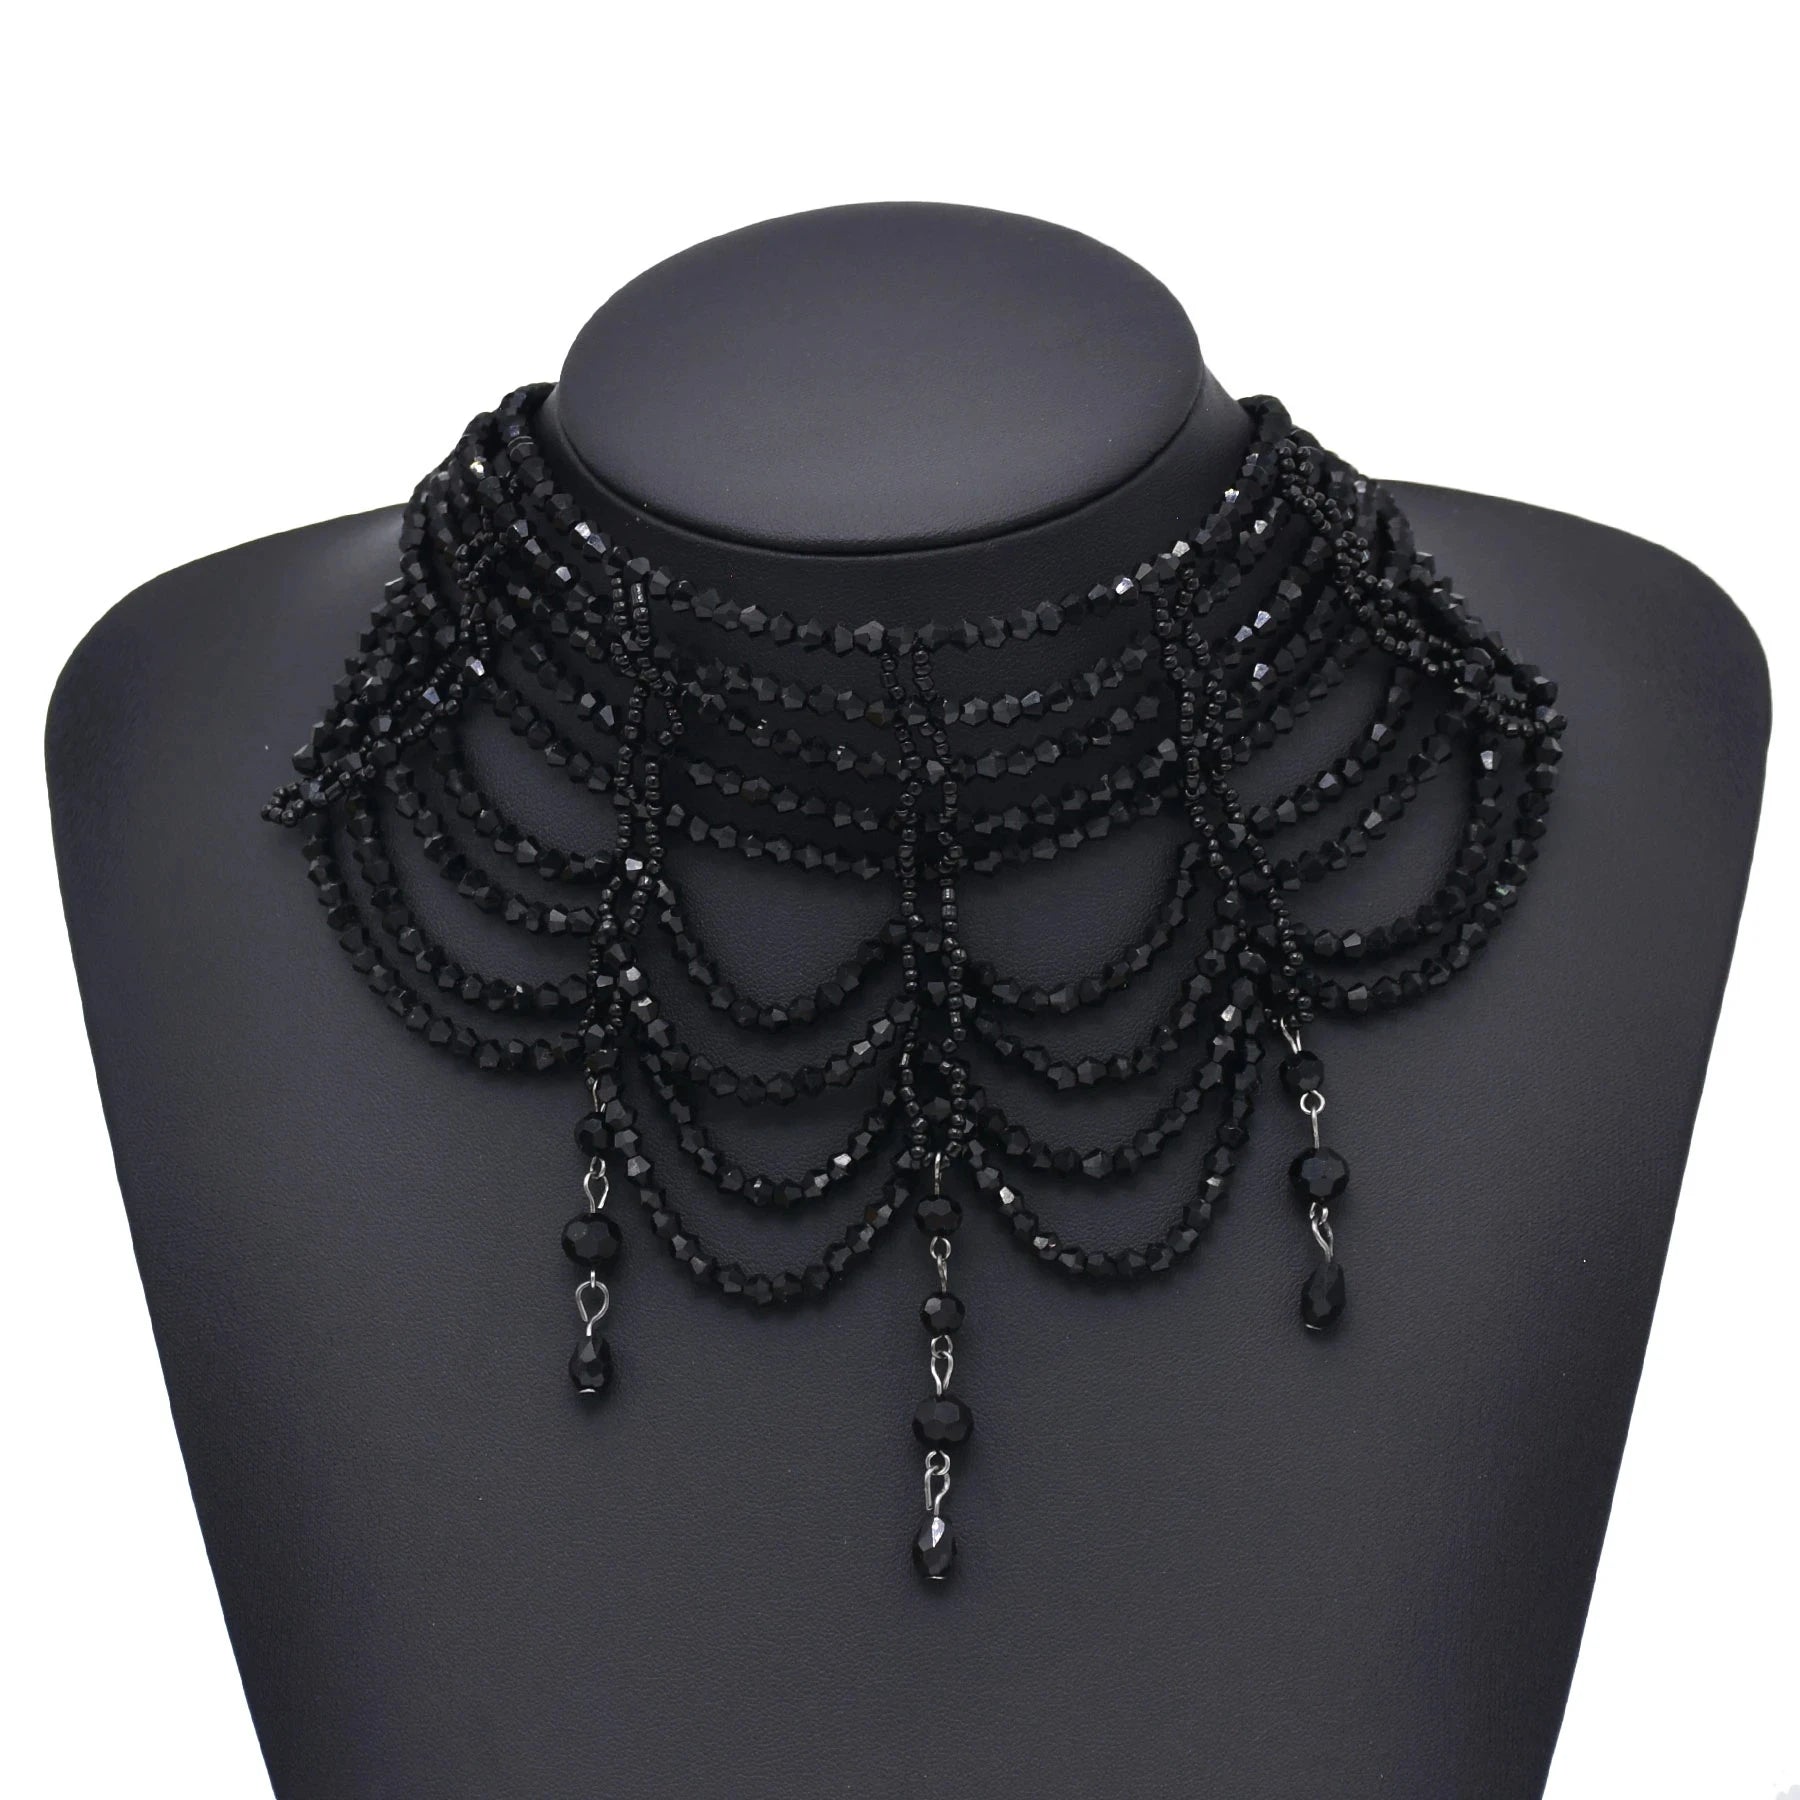 Midnight Elegance Crystal Bib Necklace | Dance in Victorian Shadows, Shine in Nightfall - A Gothic Universe - Necklaces